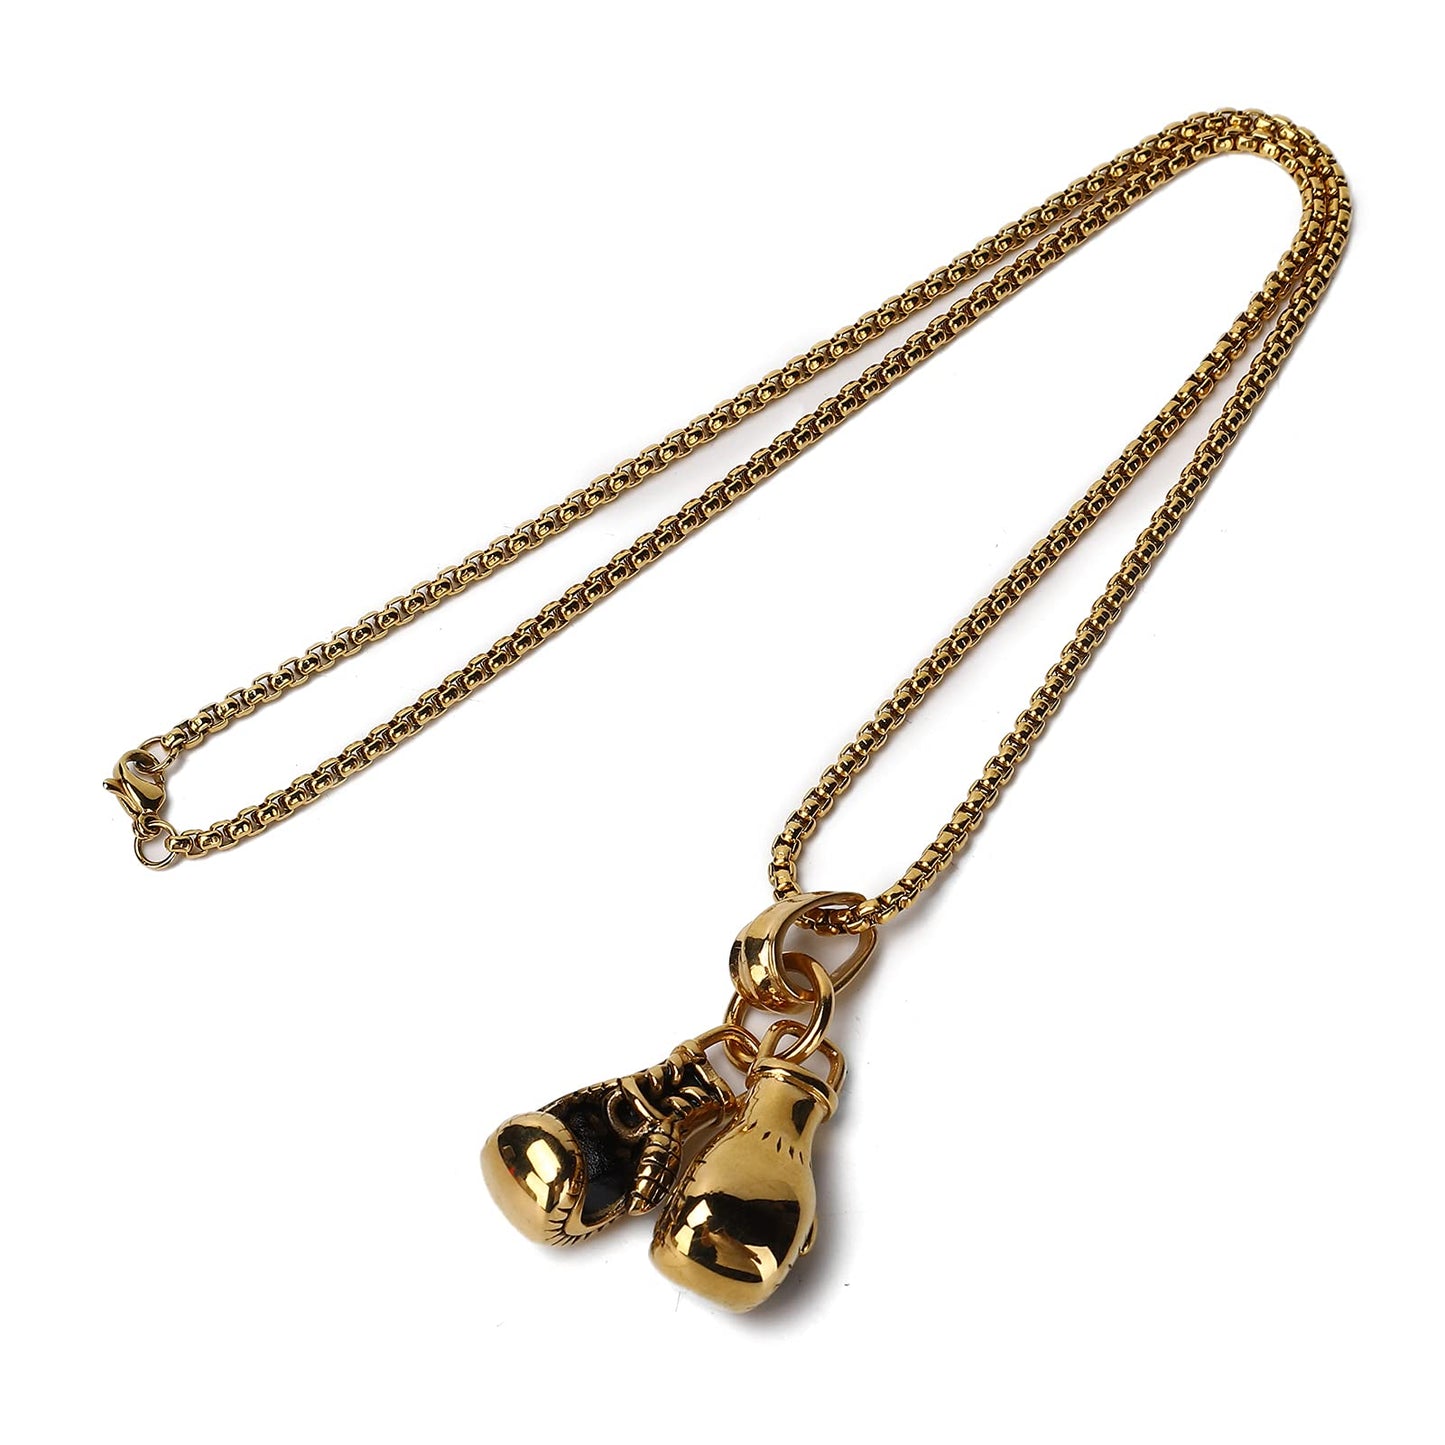 Men's Jewelry Hip Hop Style Vintage Boxing Glove Pendant Necklace Jewelry Necklace Gift Clothes Accessory Men's Jewelry Set, Men's Western Jewelry